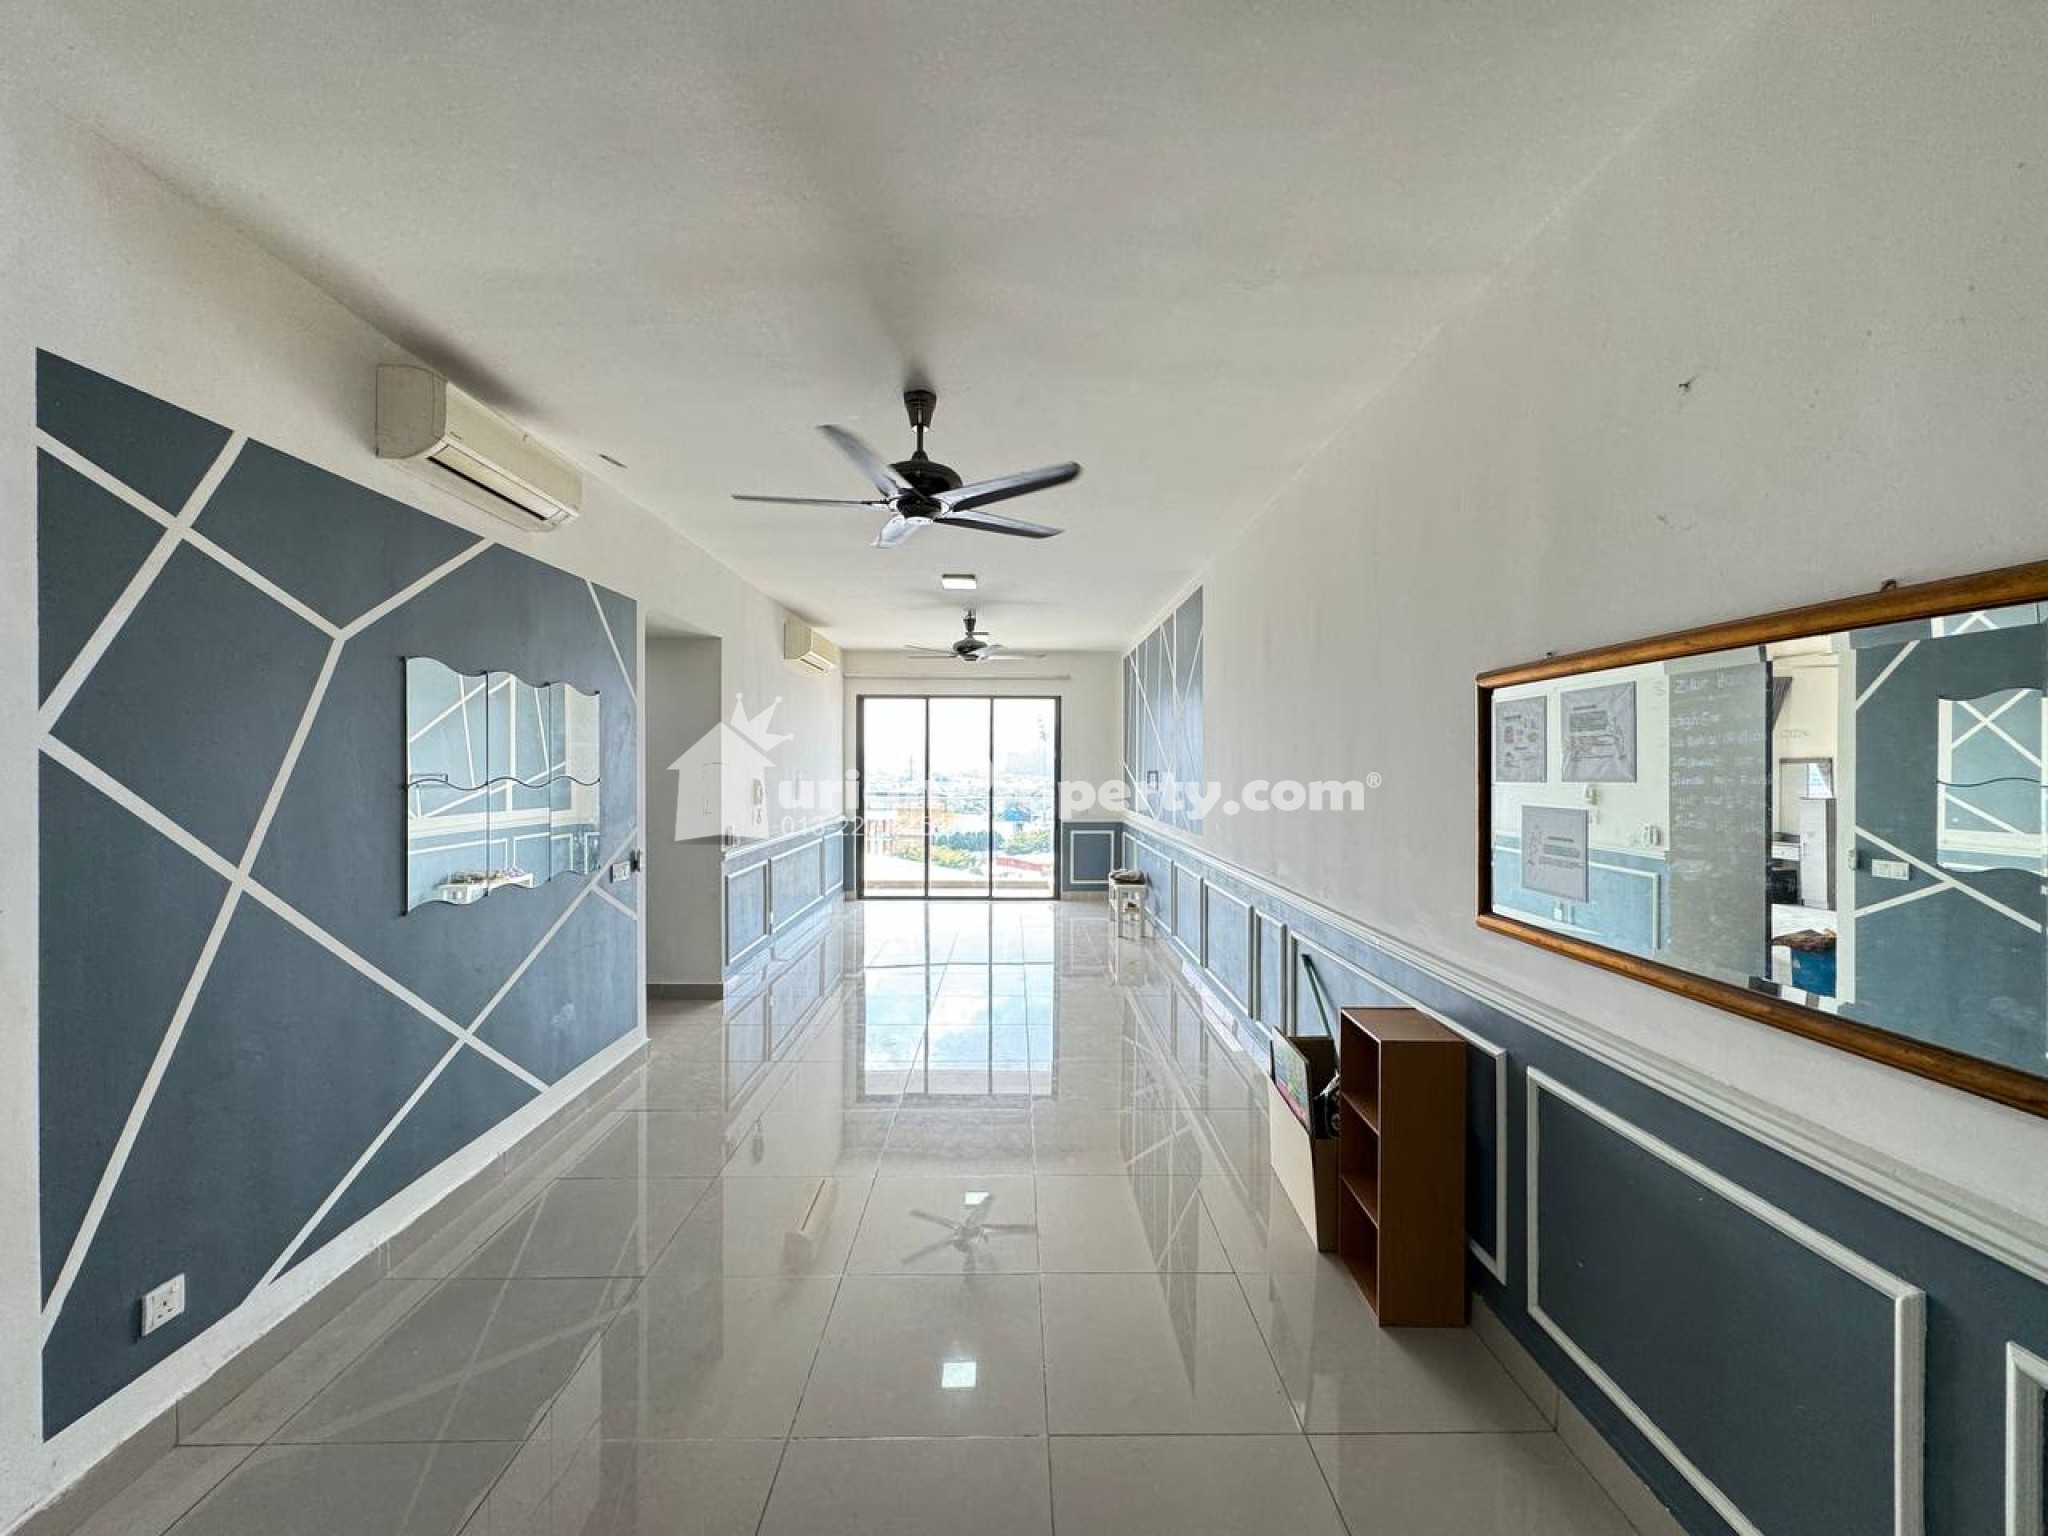 Condo For Sale at Selayang 18 Residence